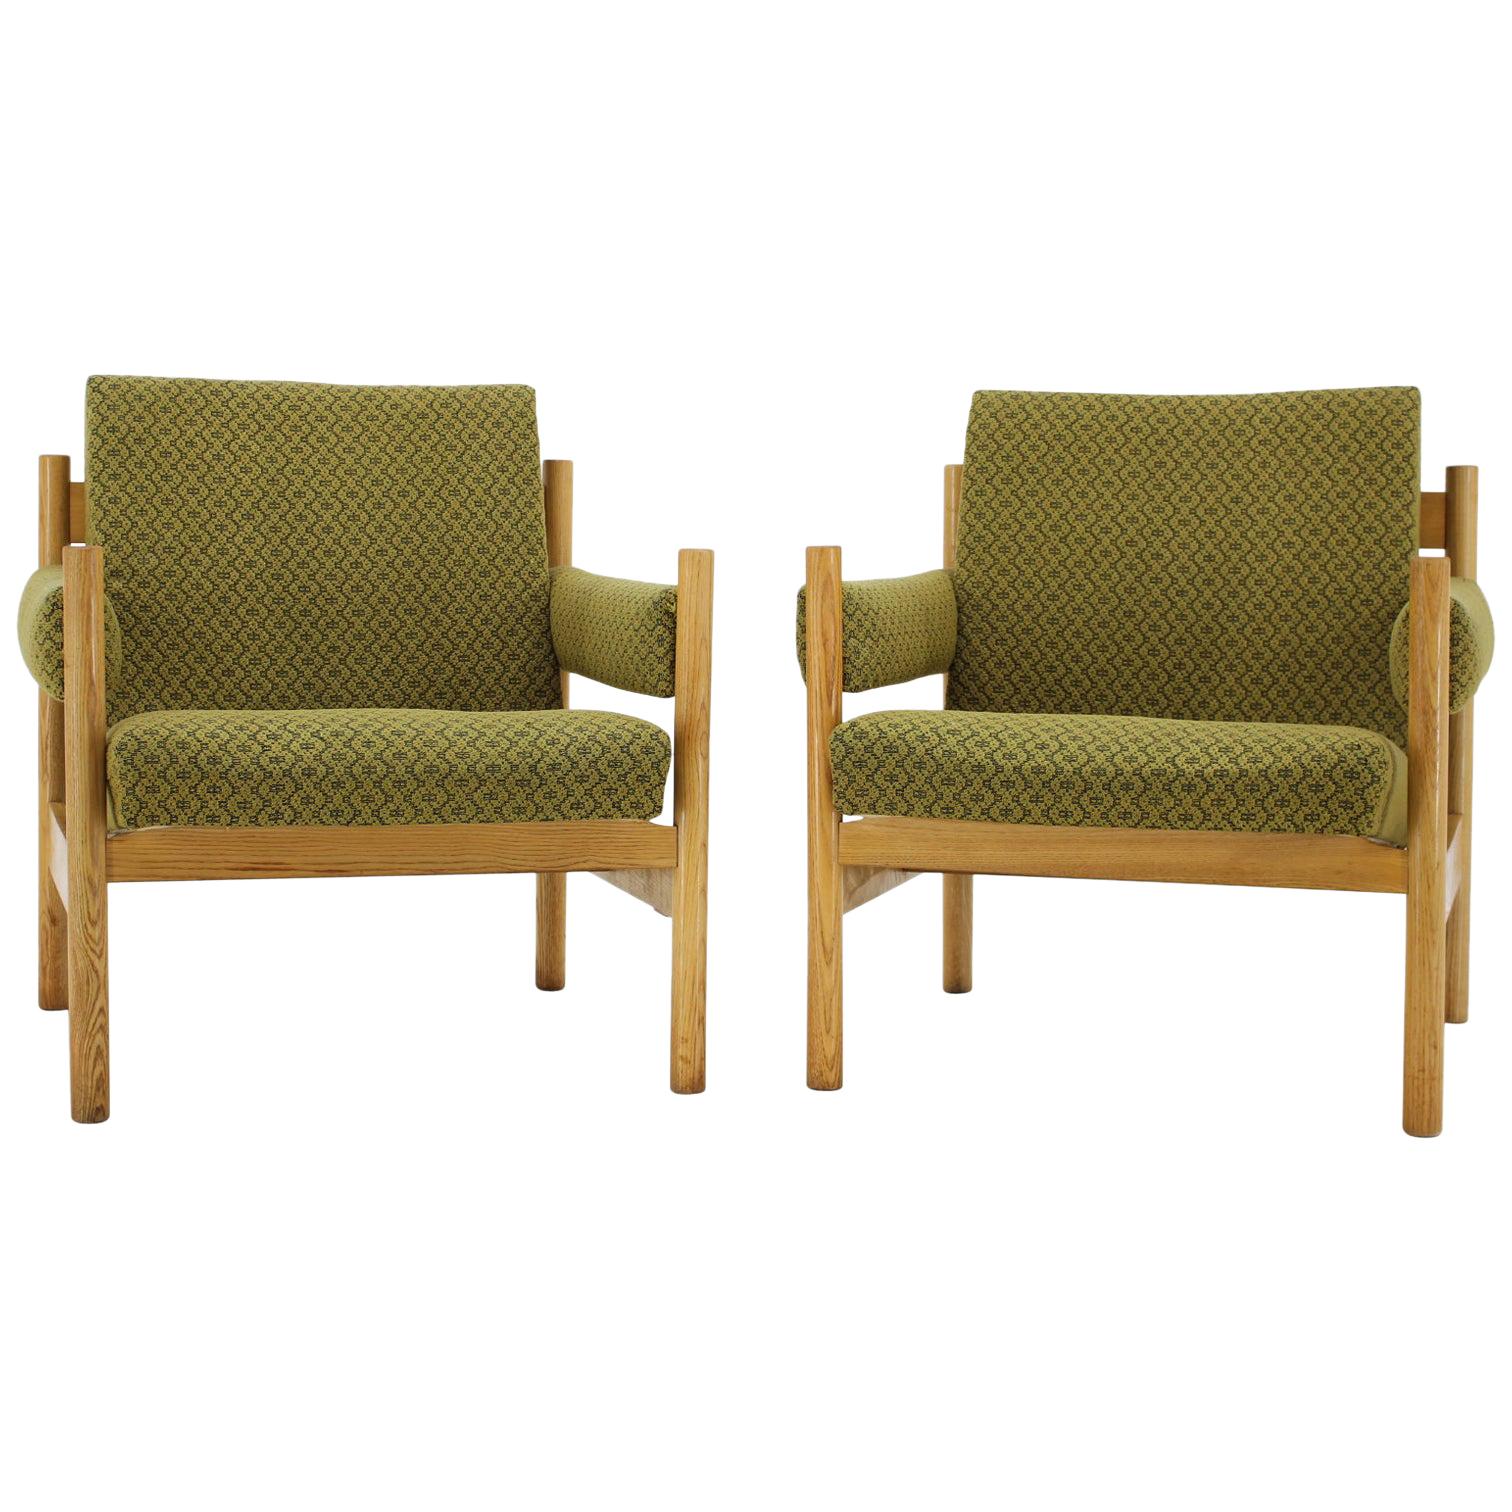 Set of Two Armchairs by Mona, 1974